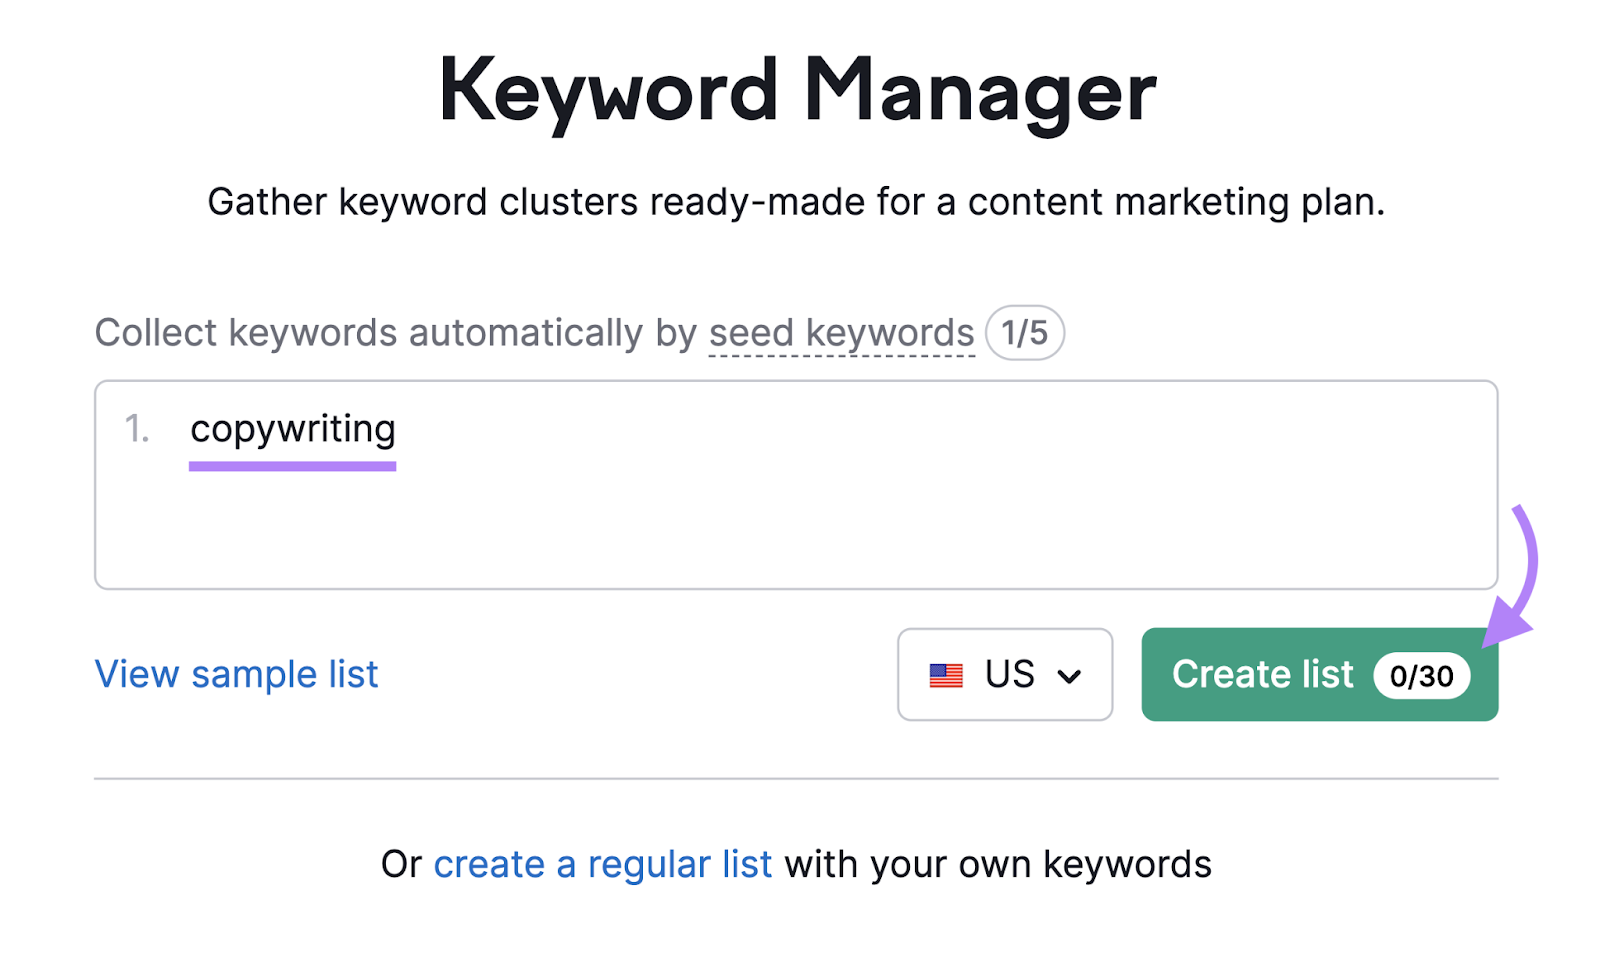 "copywriting" entered into the Keyword Manager search box